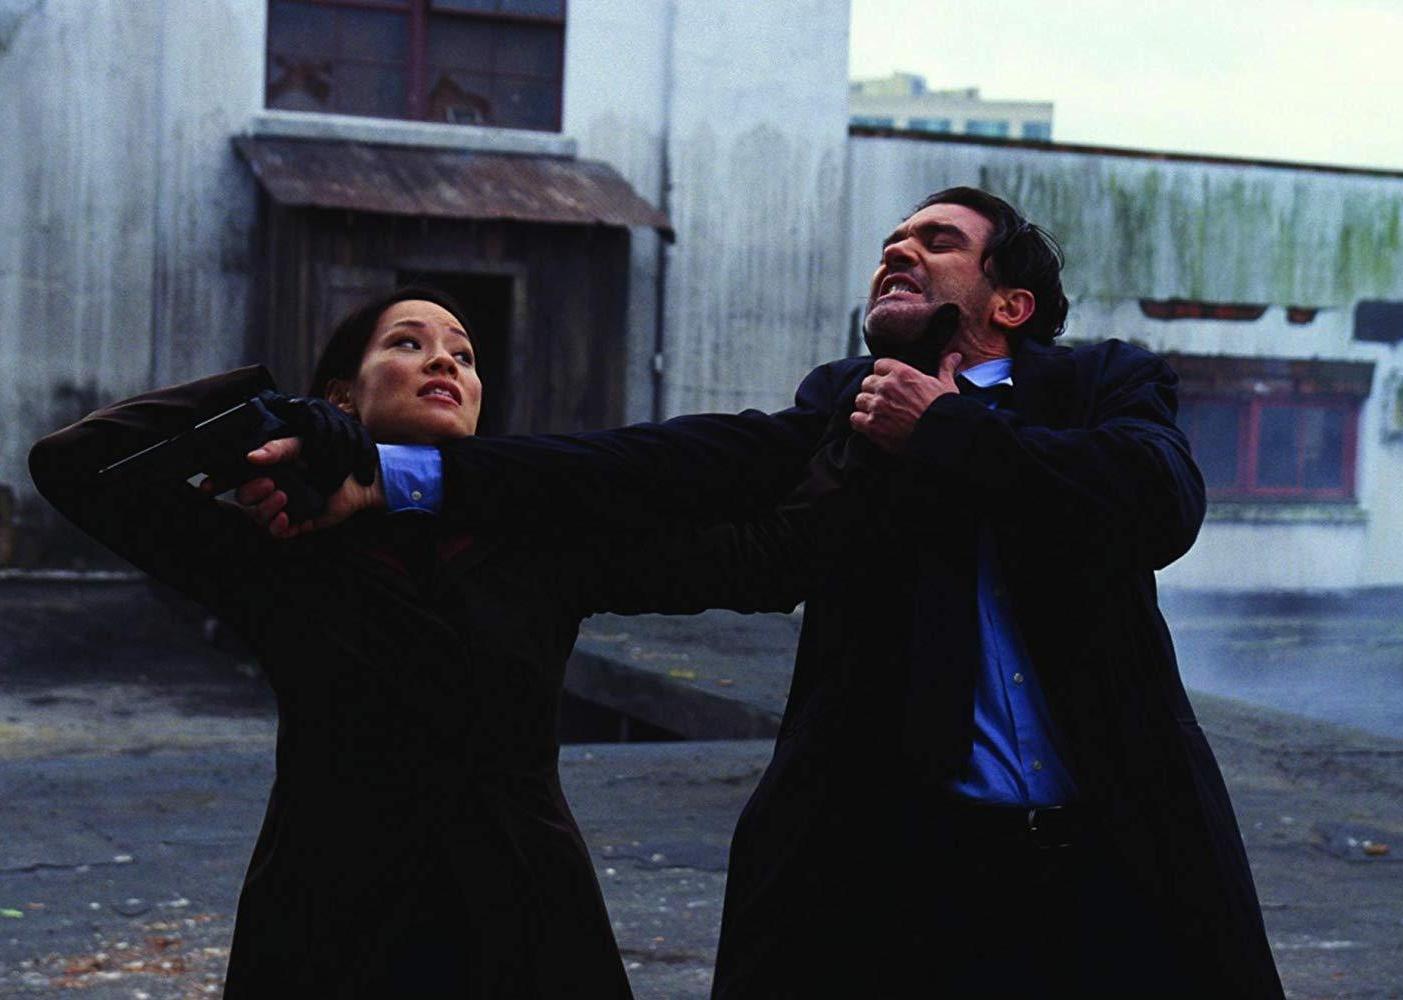 A man and woman struggle outside an industrial facility